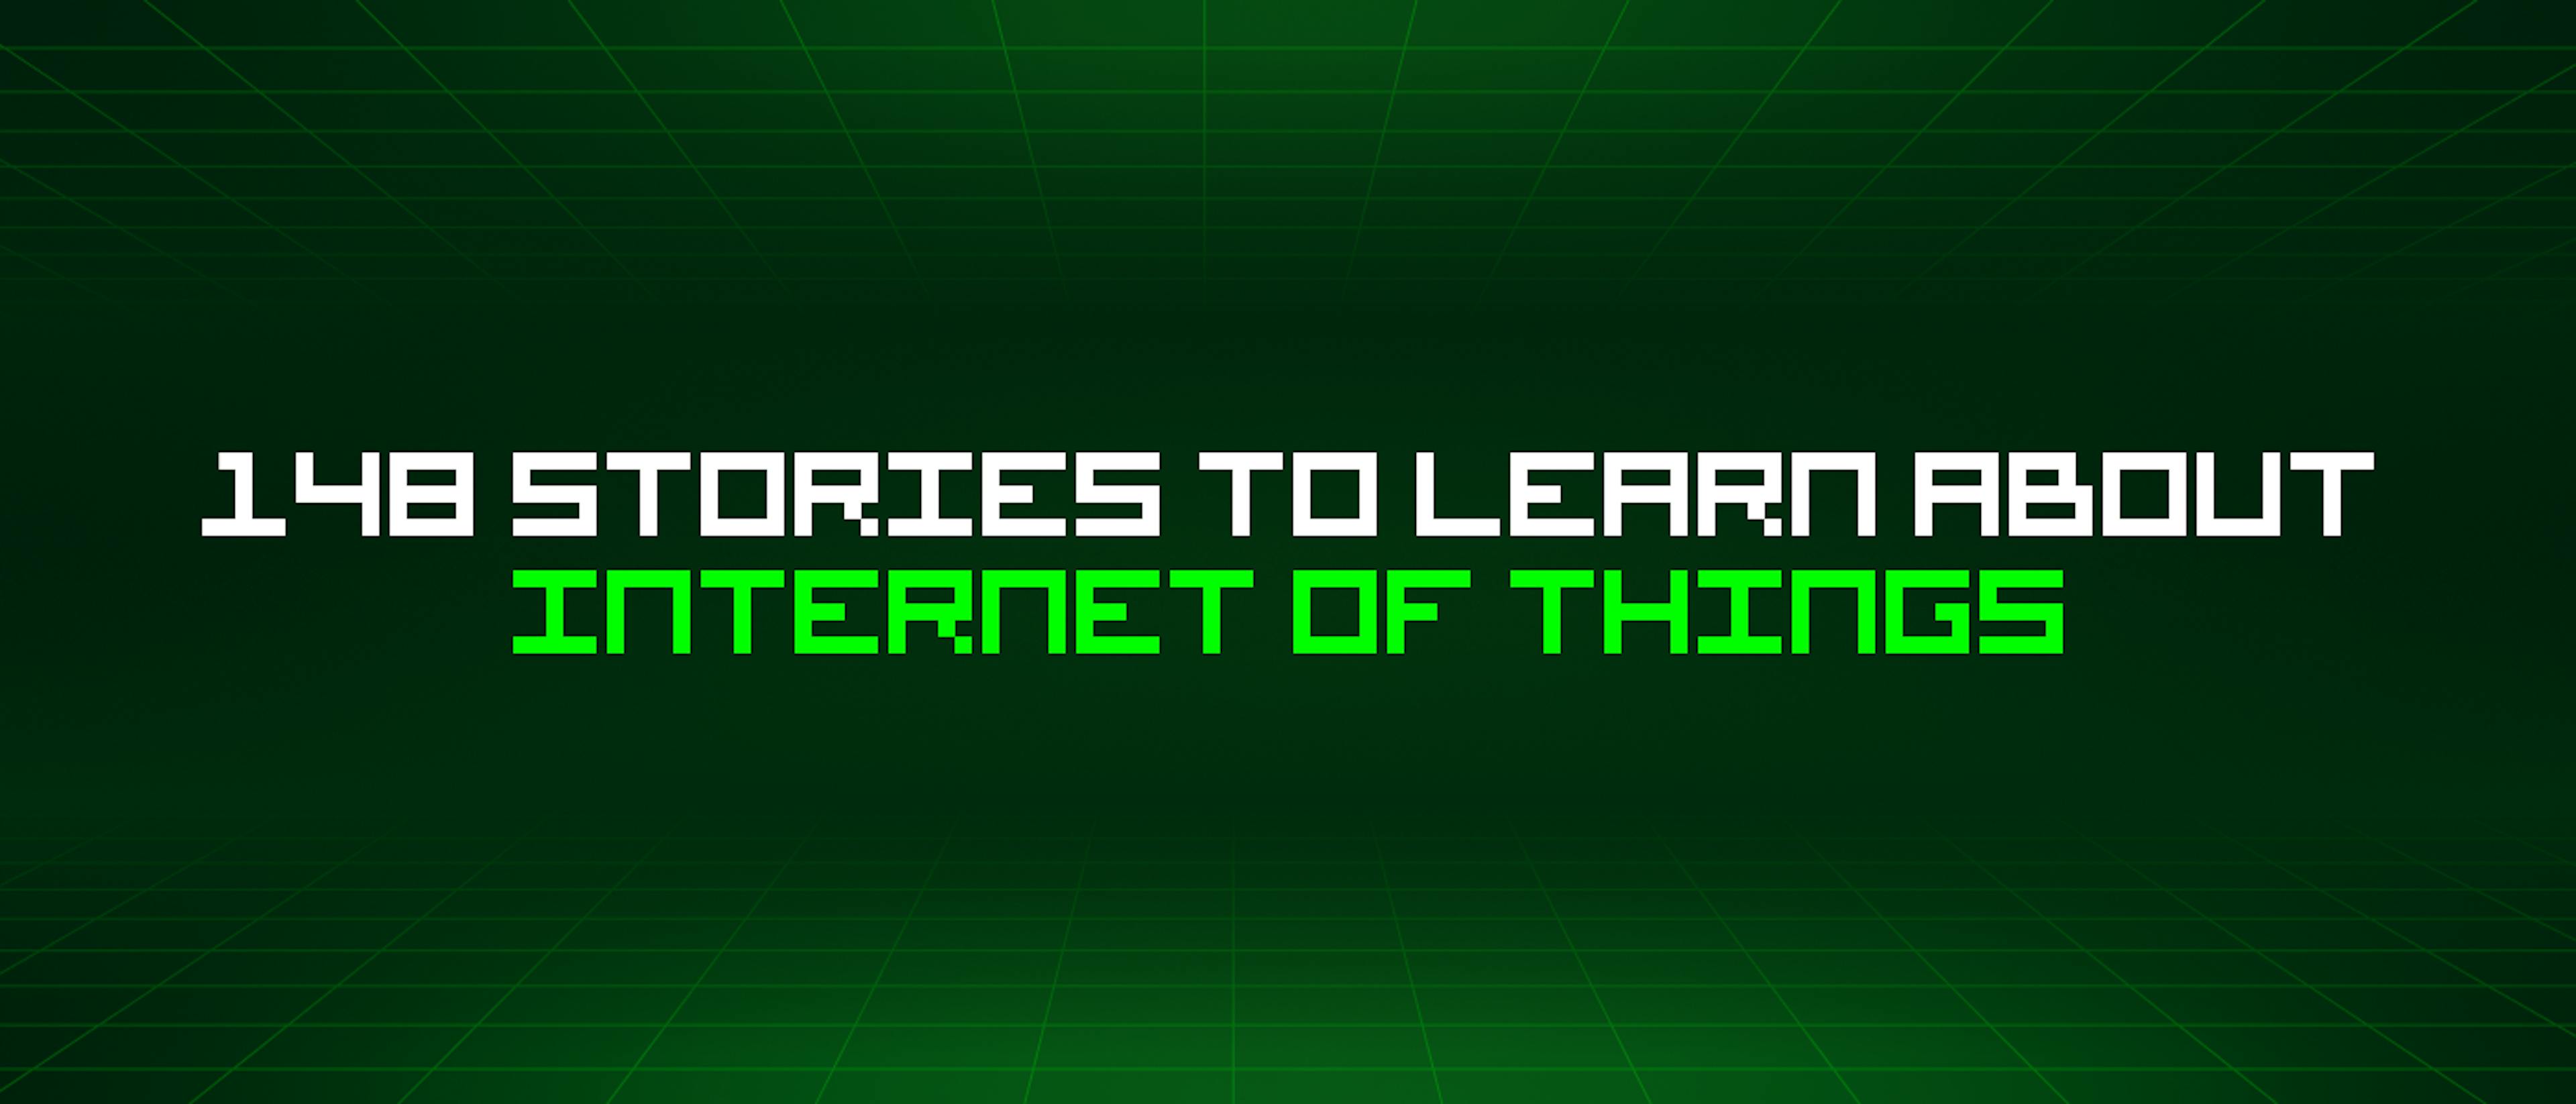 featured image - 148 Stories To Learn About Internet Of Things